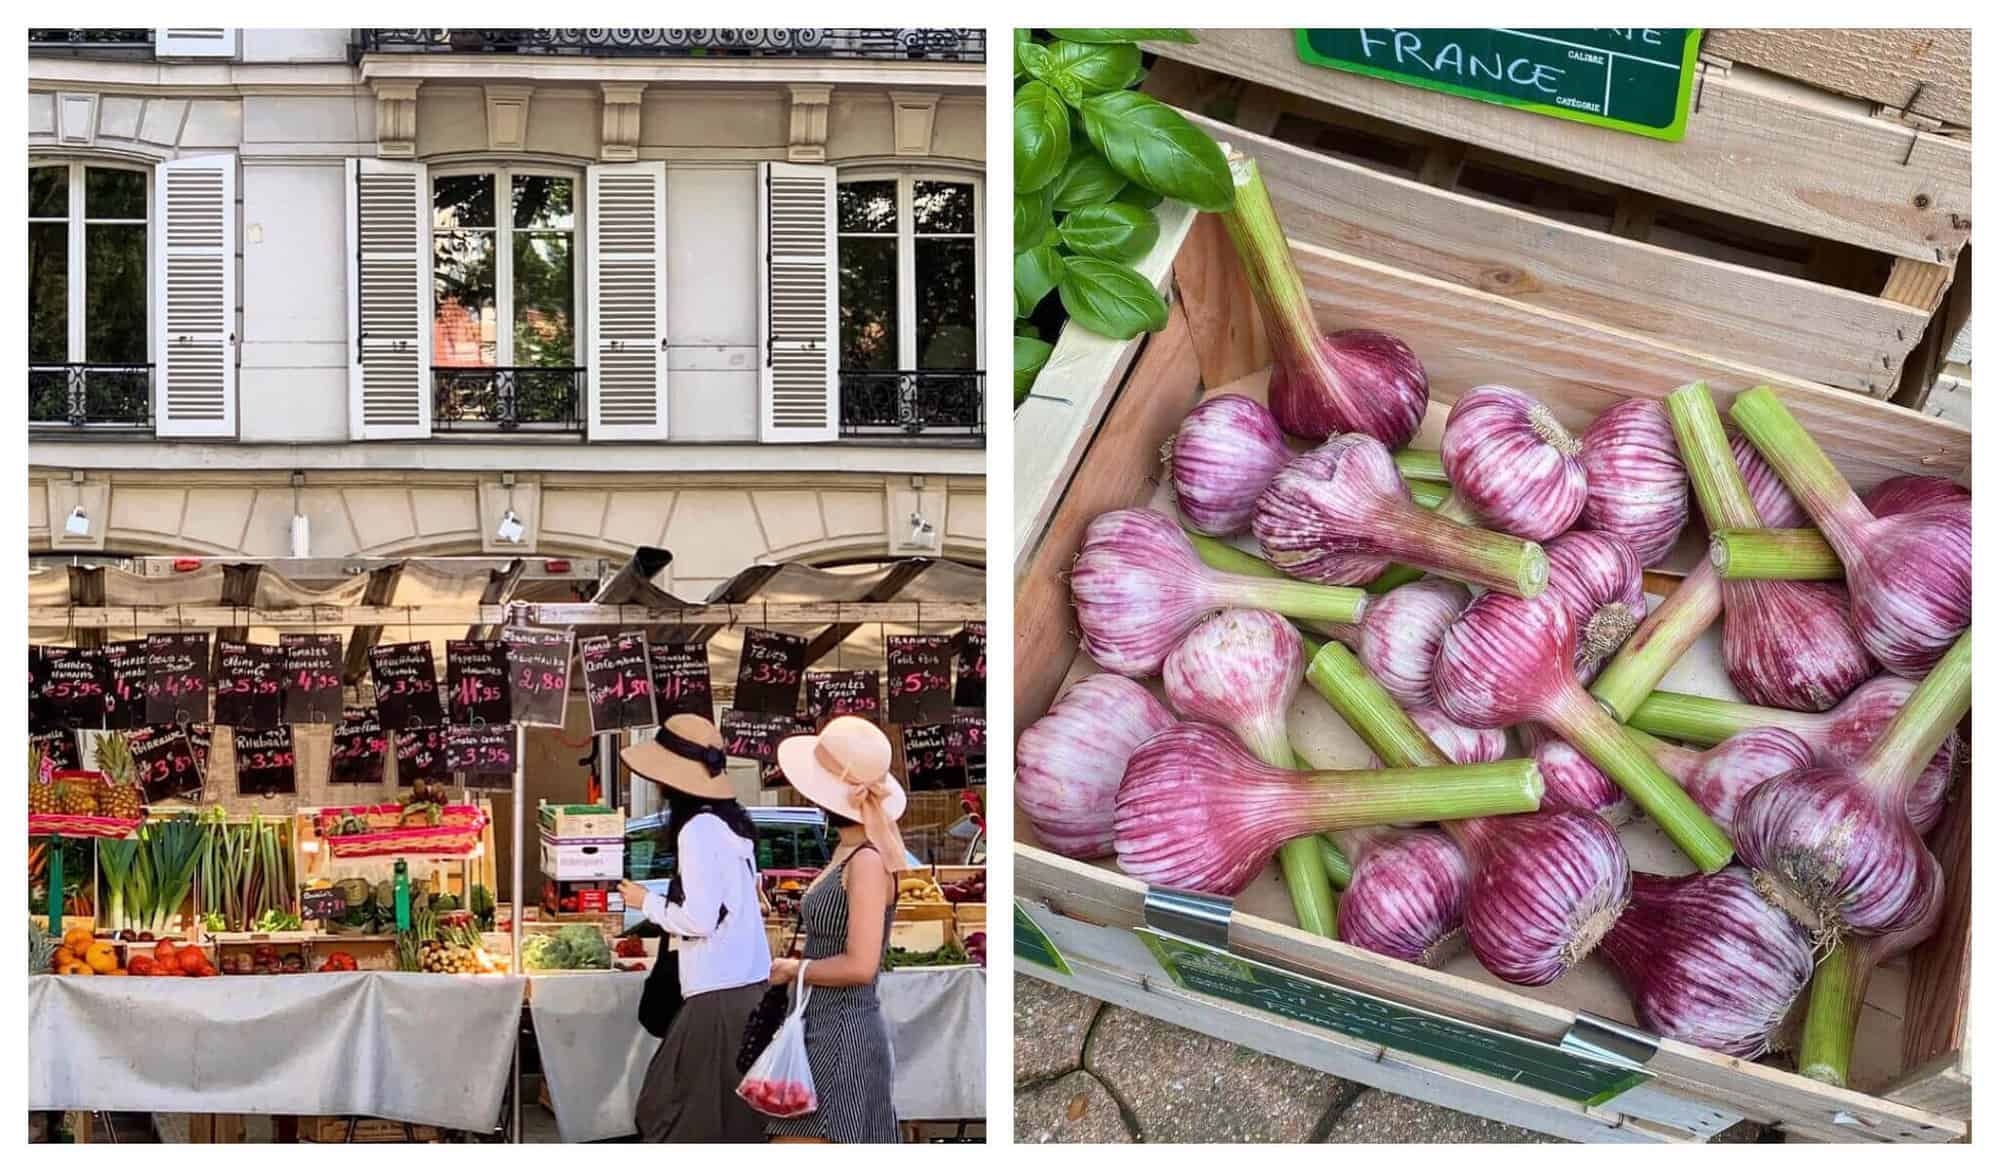 Left: Two women with straw hats walk past a street market in Paris. Left: A box full of reddish garlic for sale at a French market.